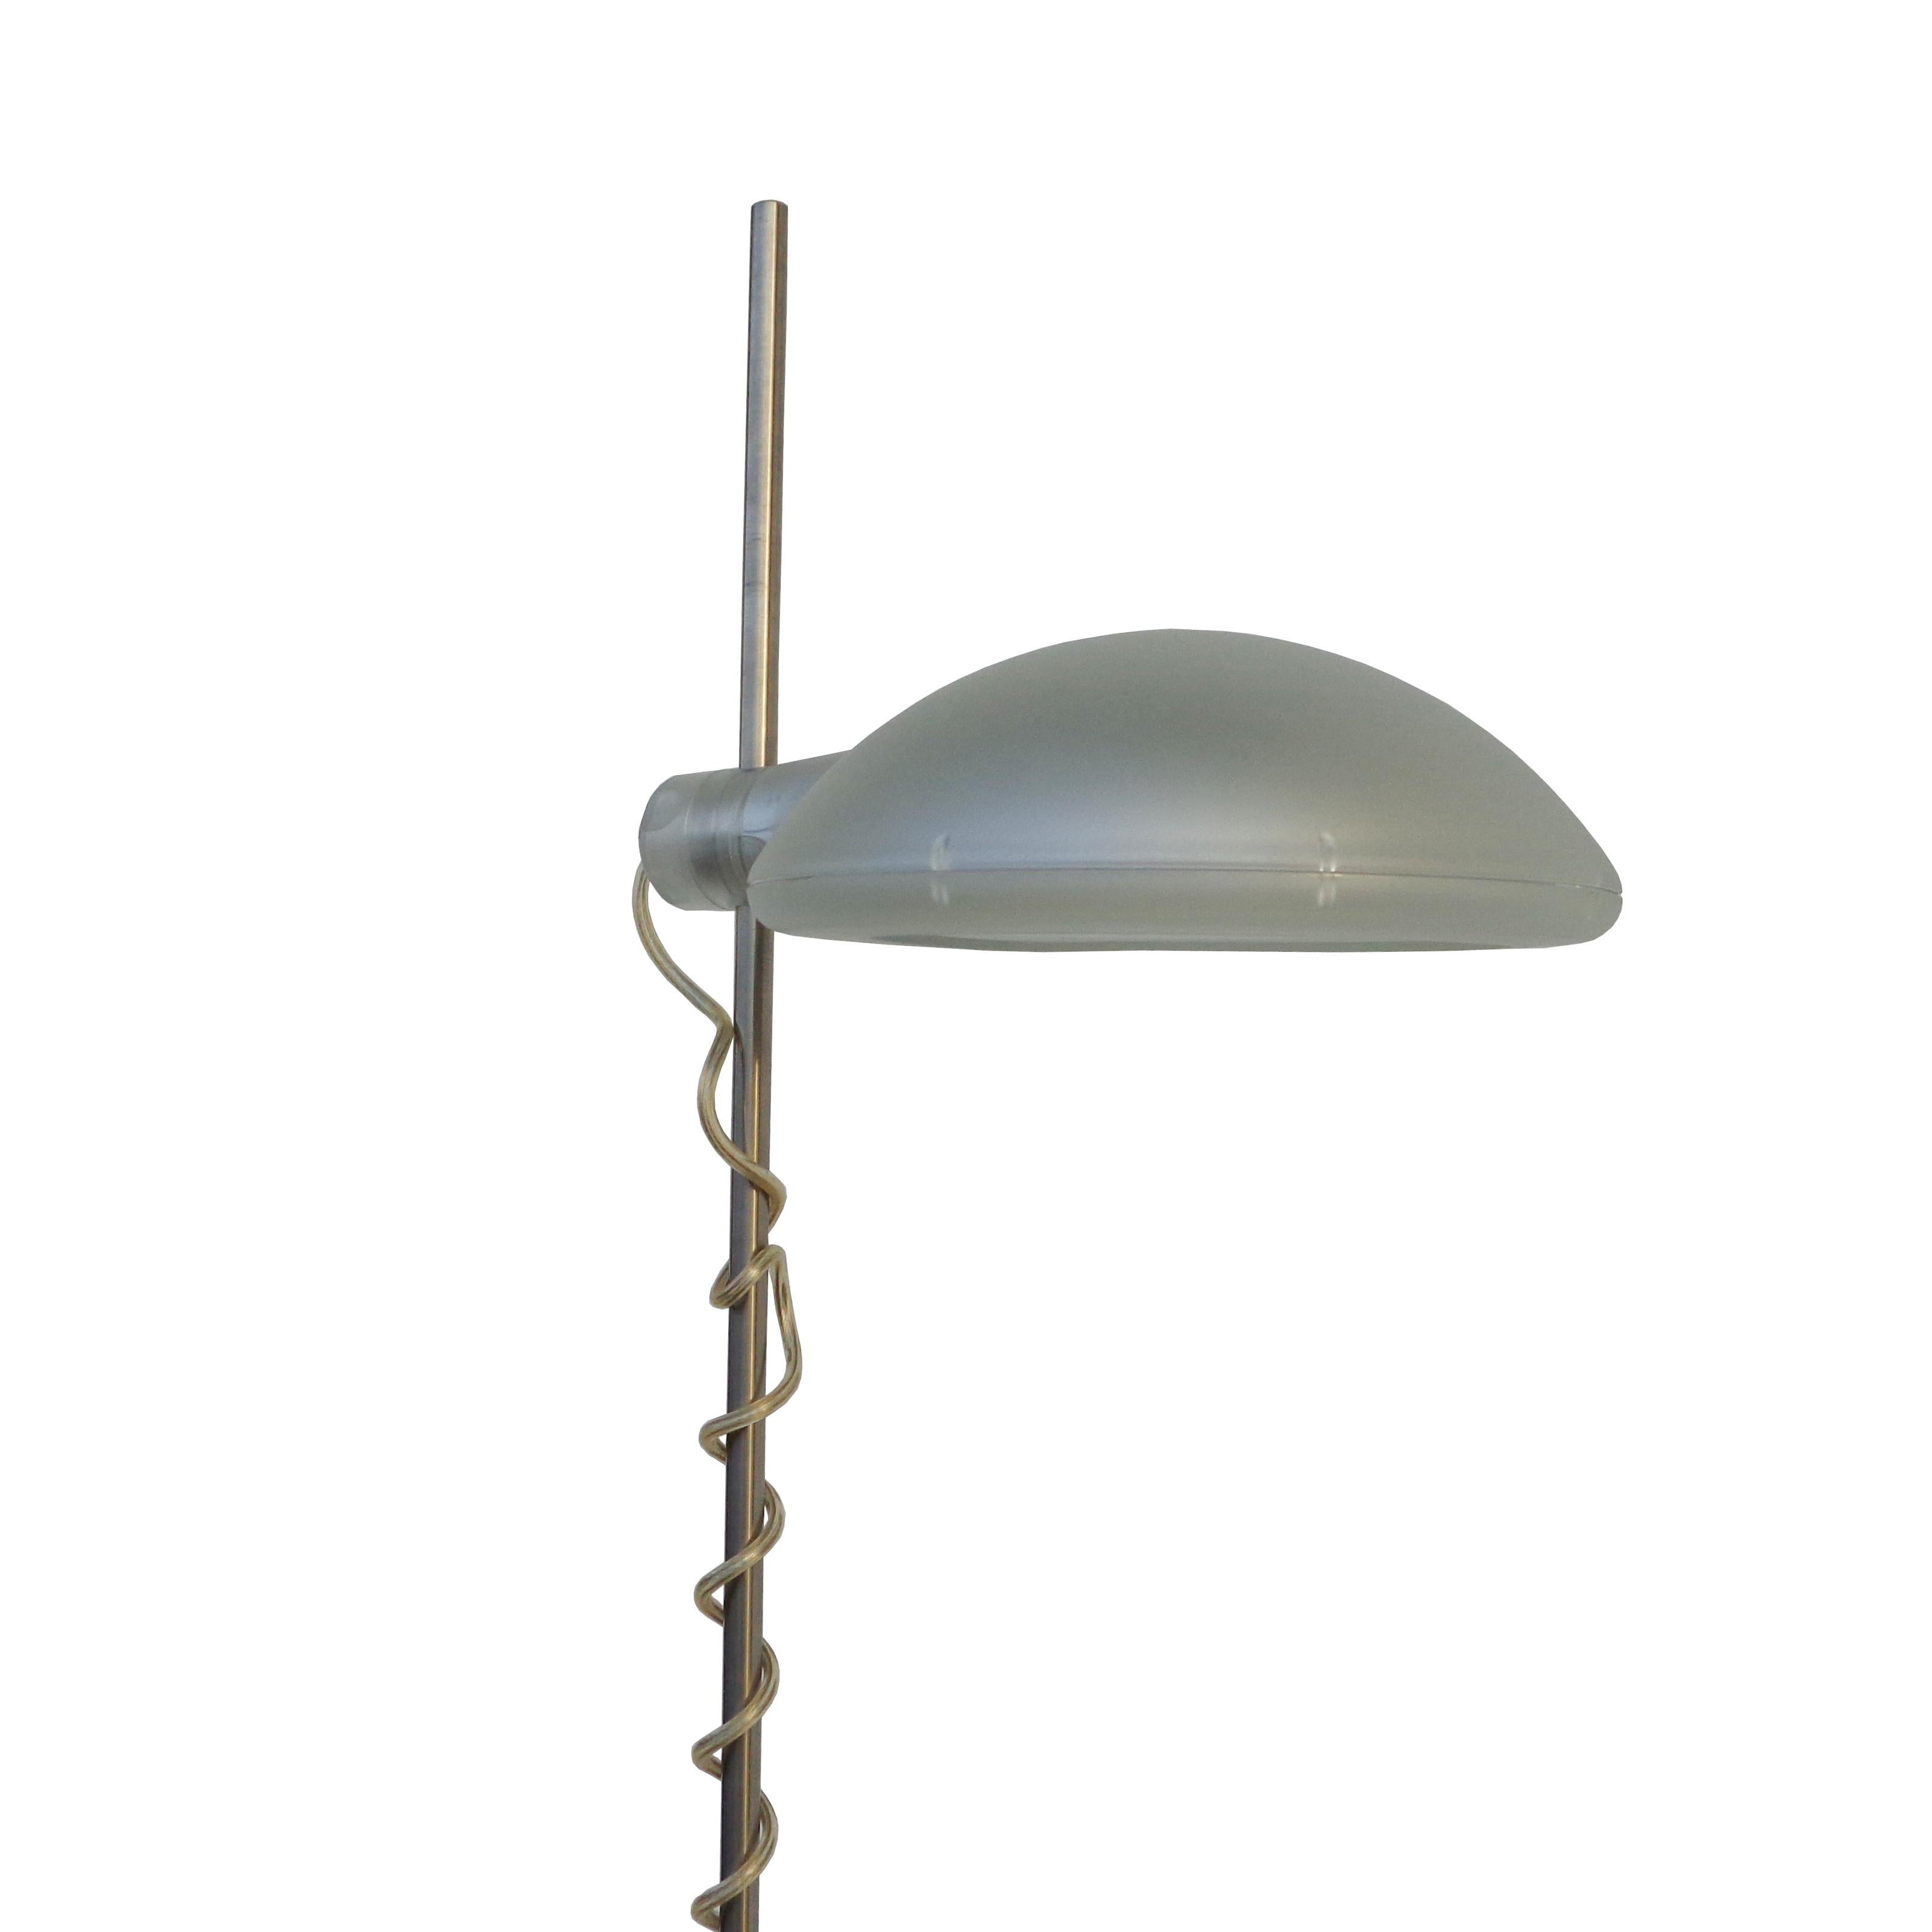 Flos Luxmaster floor lamp by Jasper Morrison 

Adjustable floor lamp made by famous Italian lighting company Flos Luxmaster and designed by award winning designer Jasper Morrison in the late 1990s-early 2000s. Includes dimmer switch, rotatable